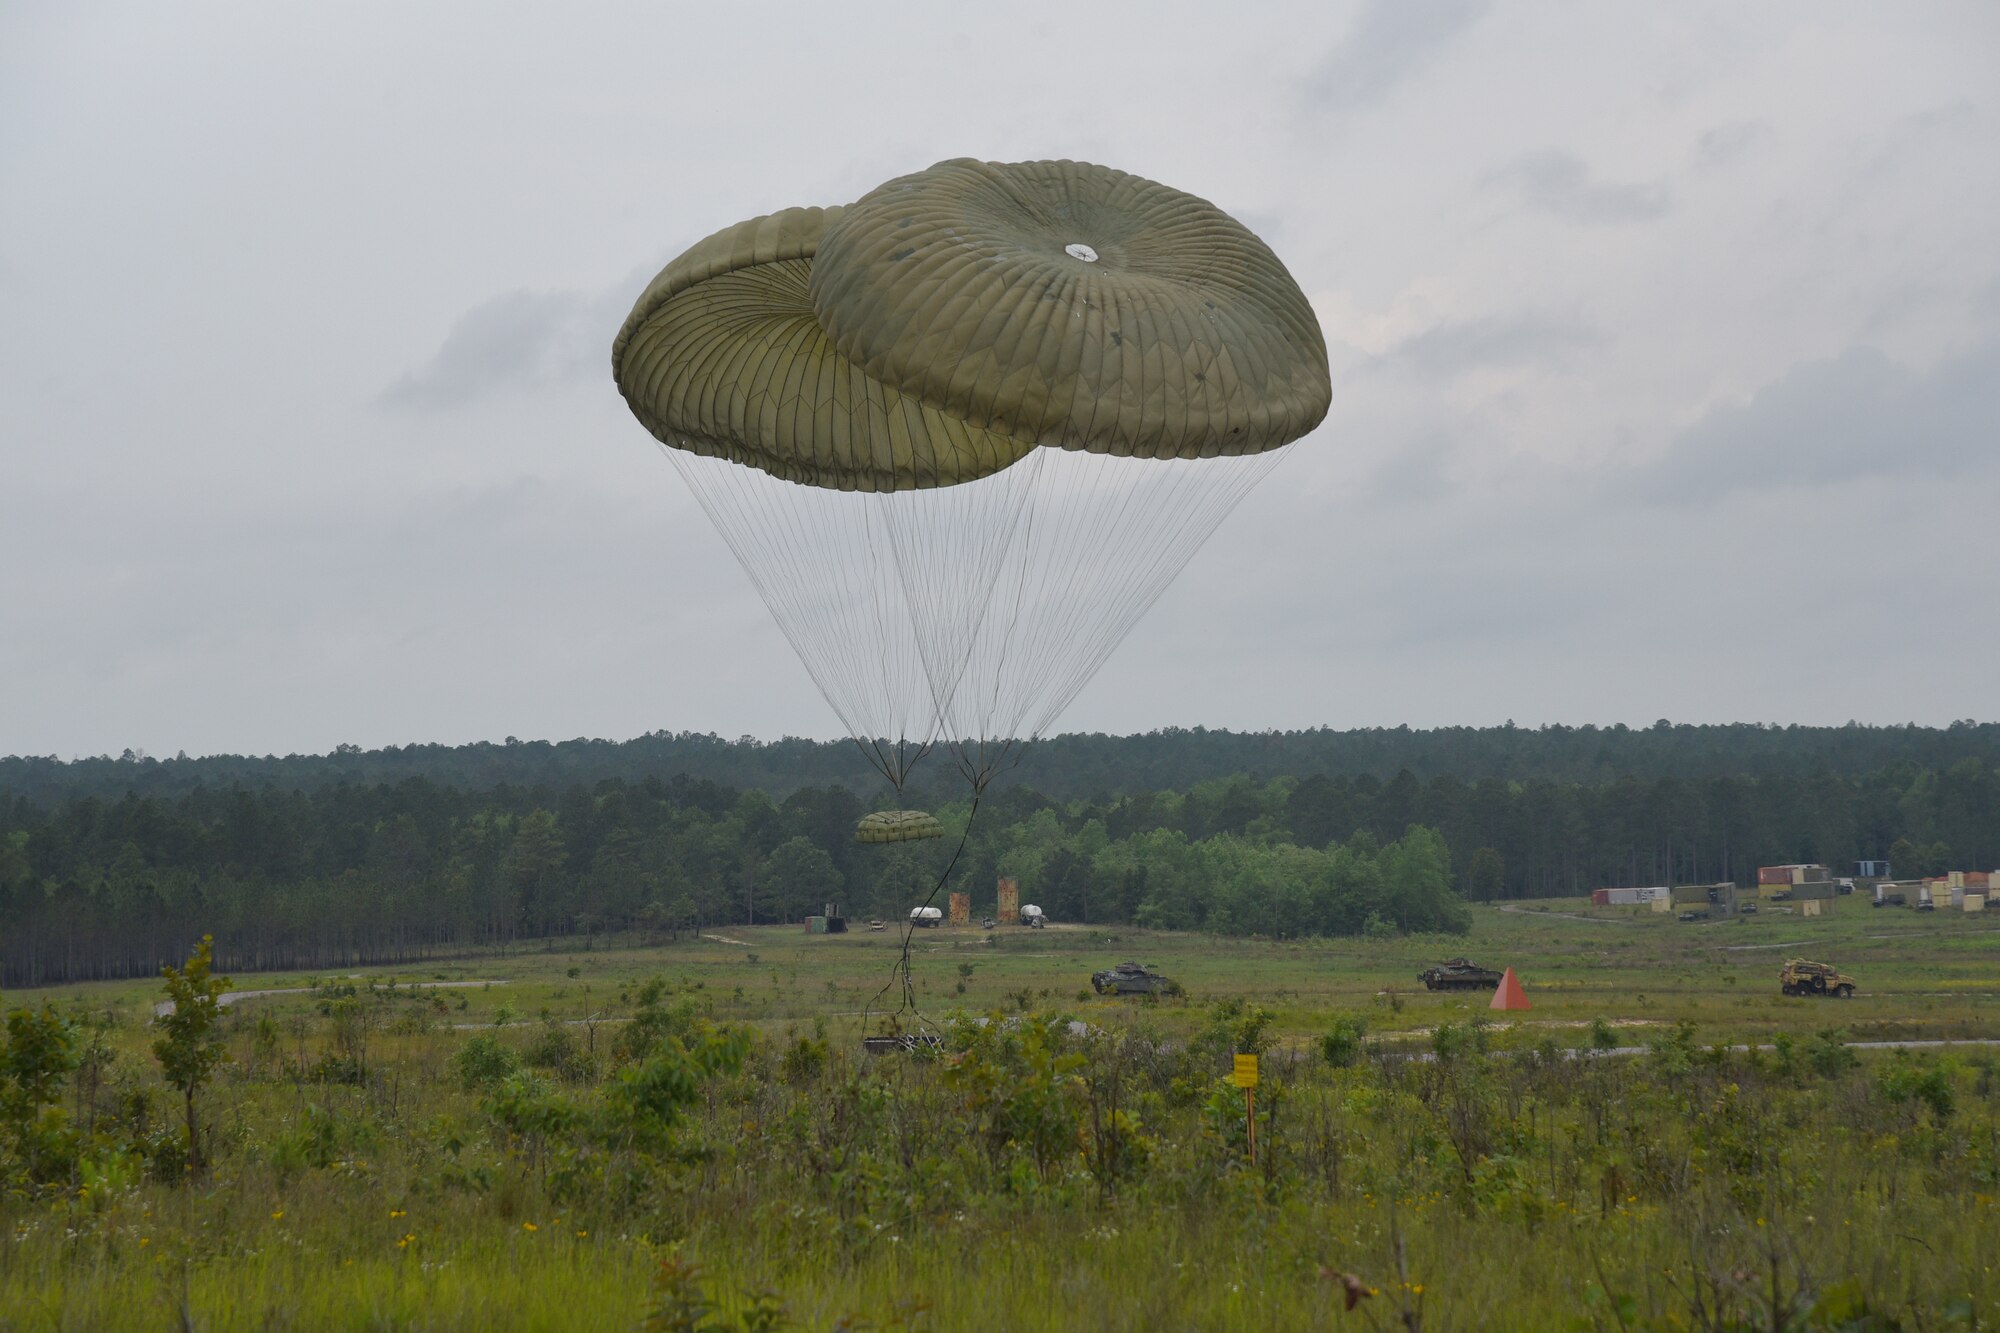 Parachutes on the heavy bundle as it was landing in the drop zone.